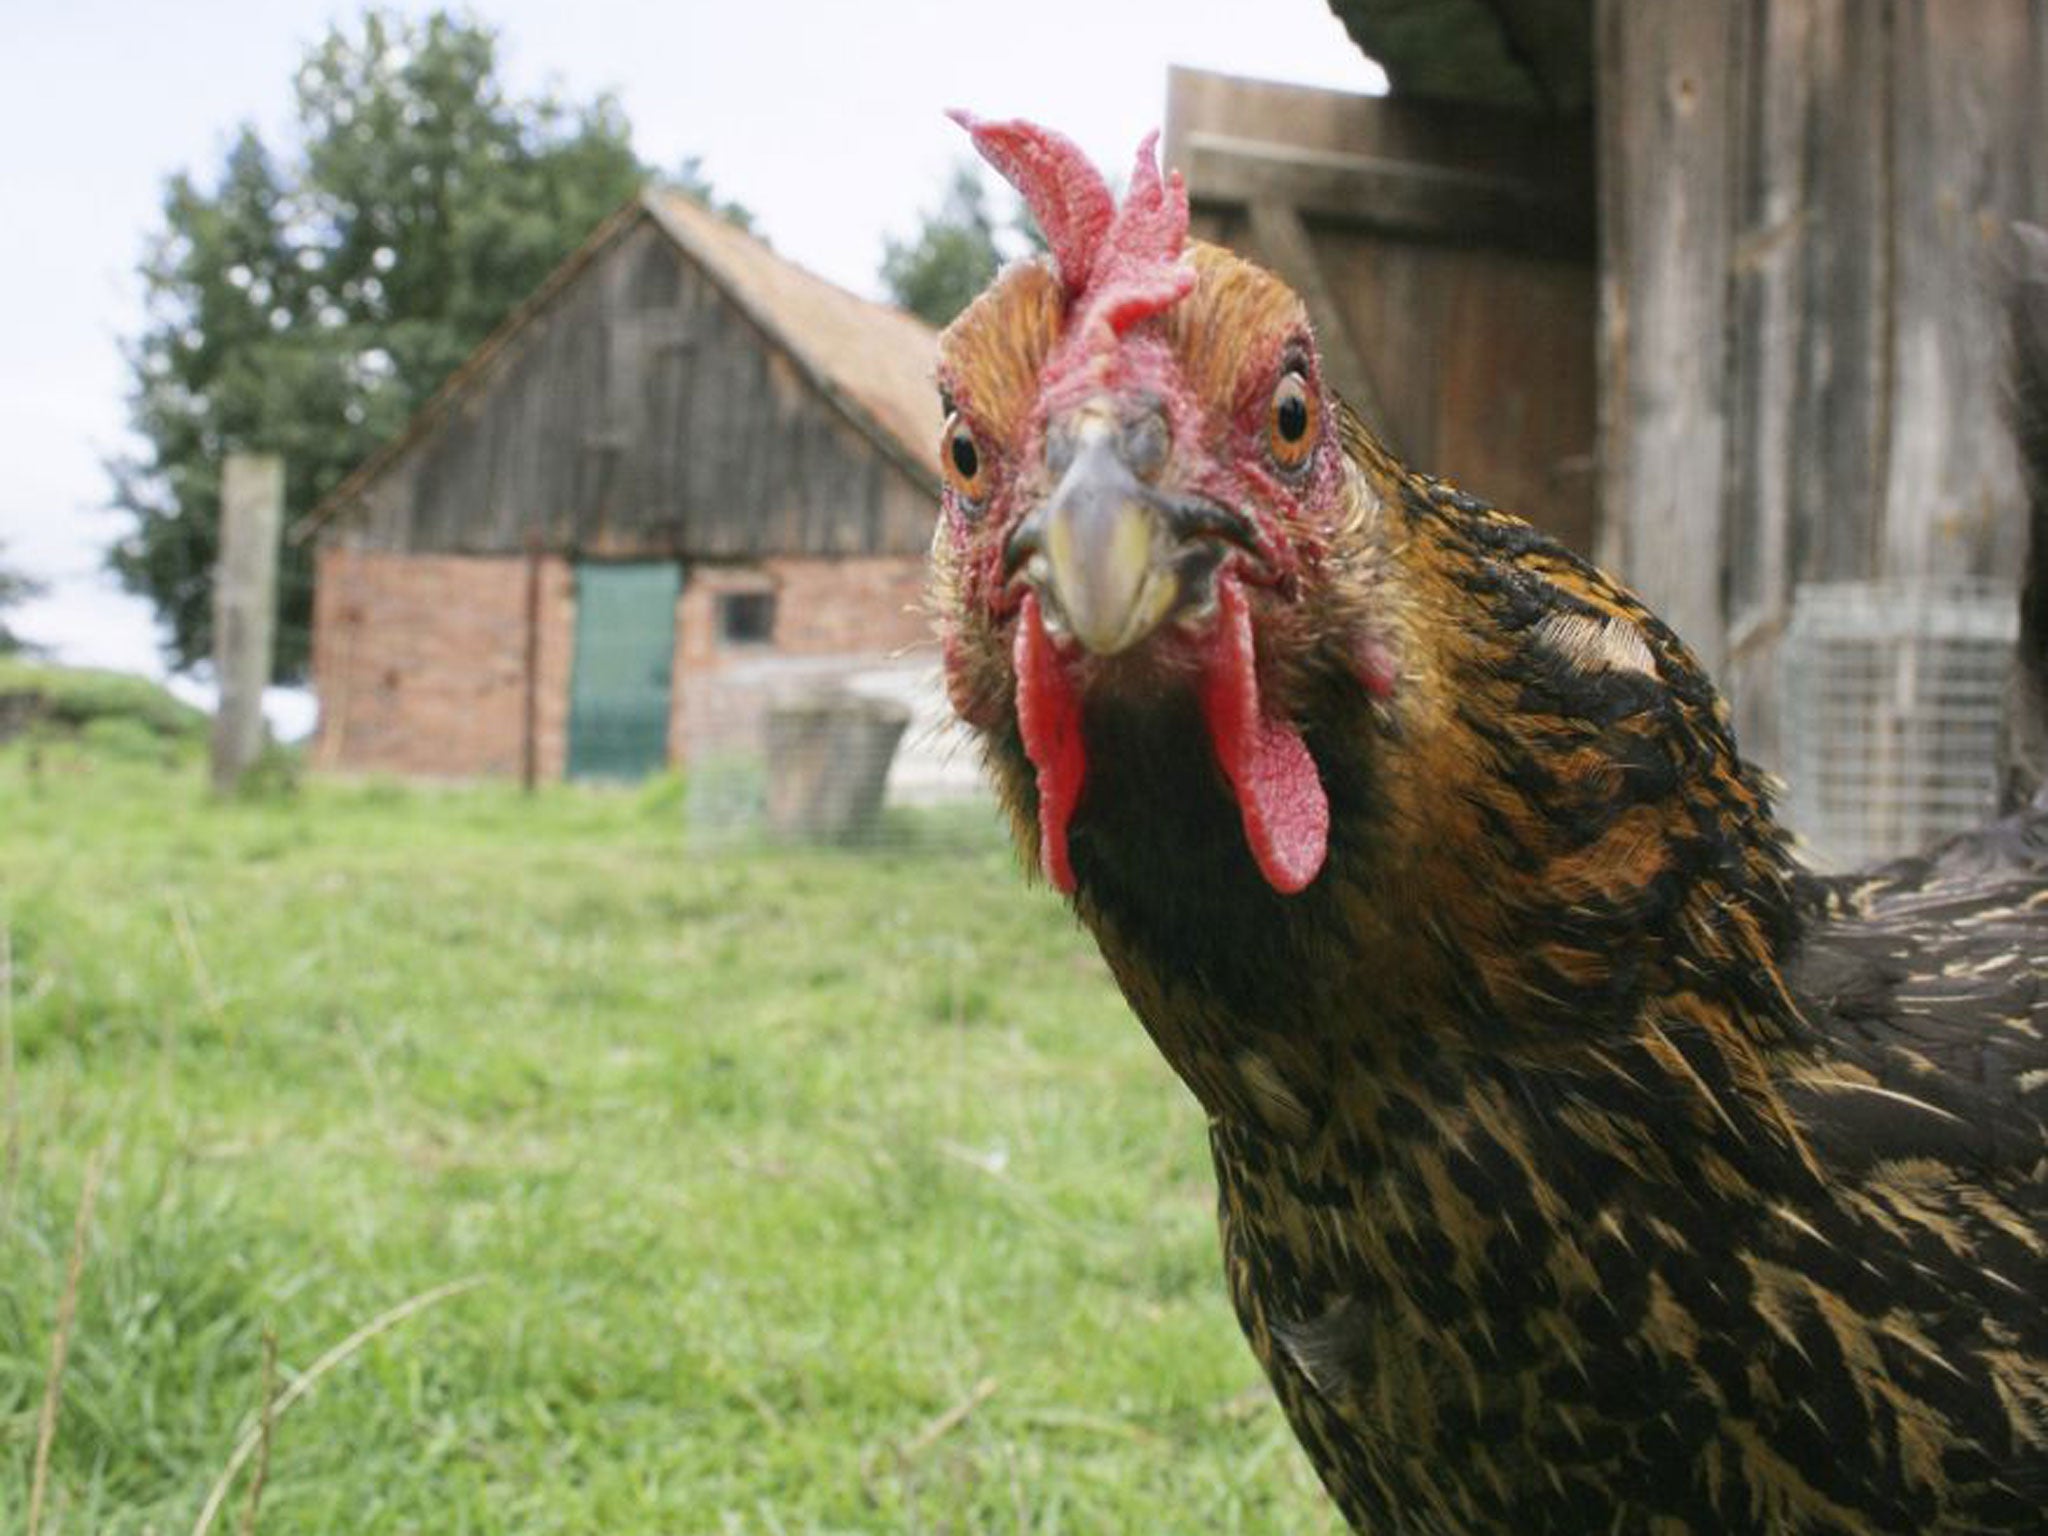 Free-range eggs: Sales of eggs from hens allowed to roam rose again, from £497m to £526m in 2011.